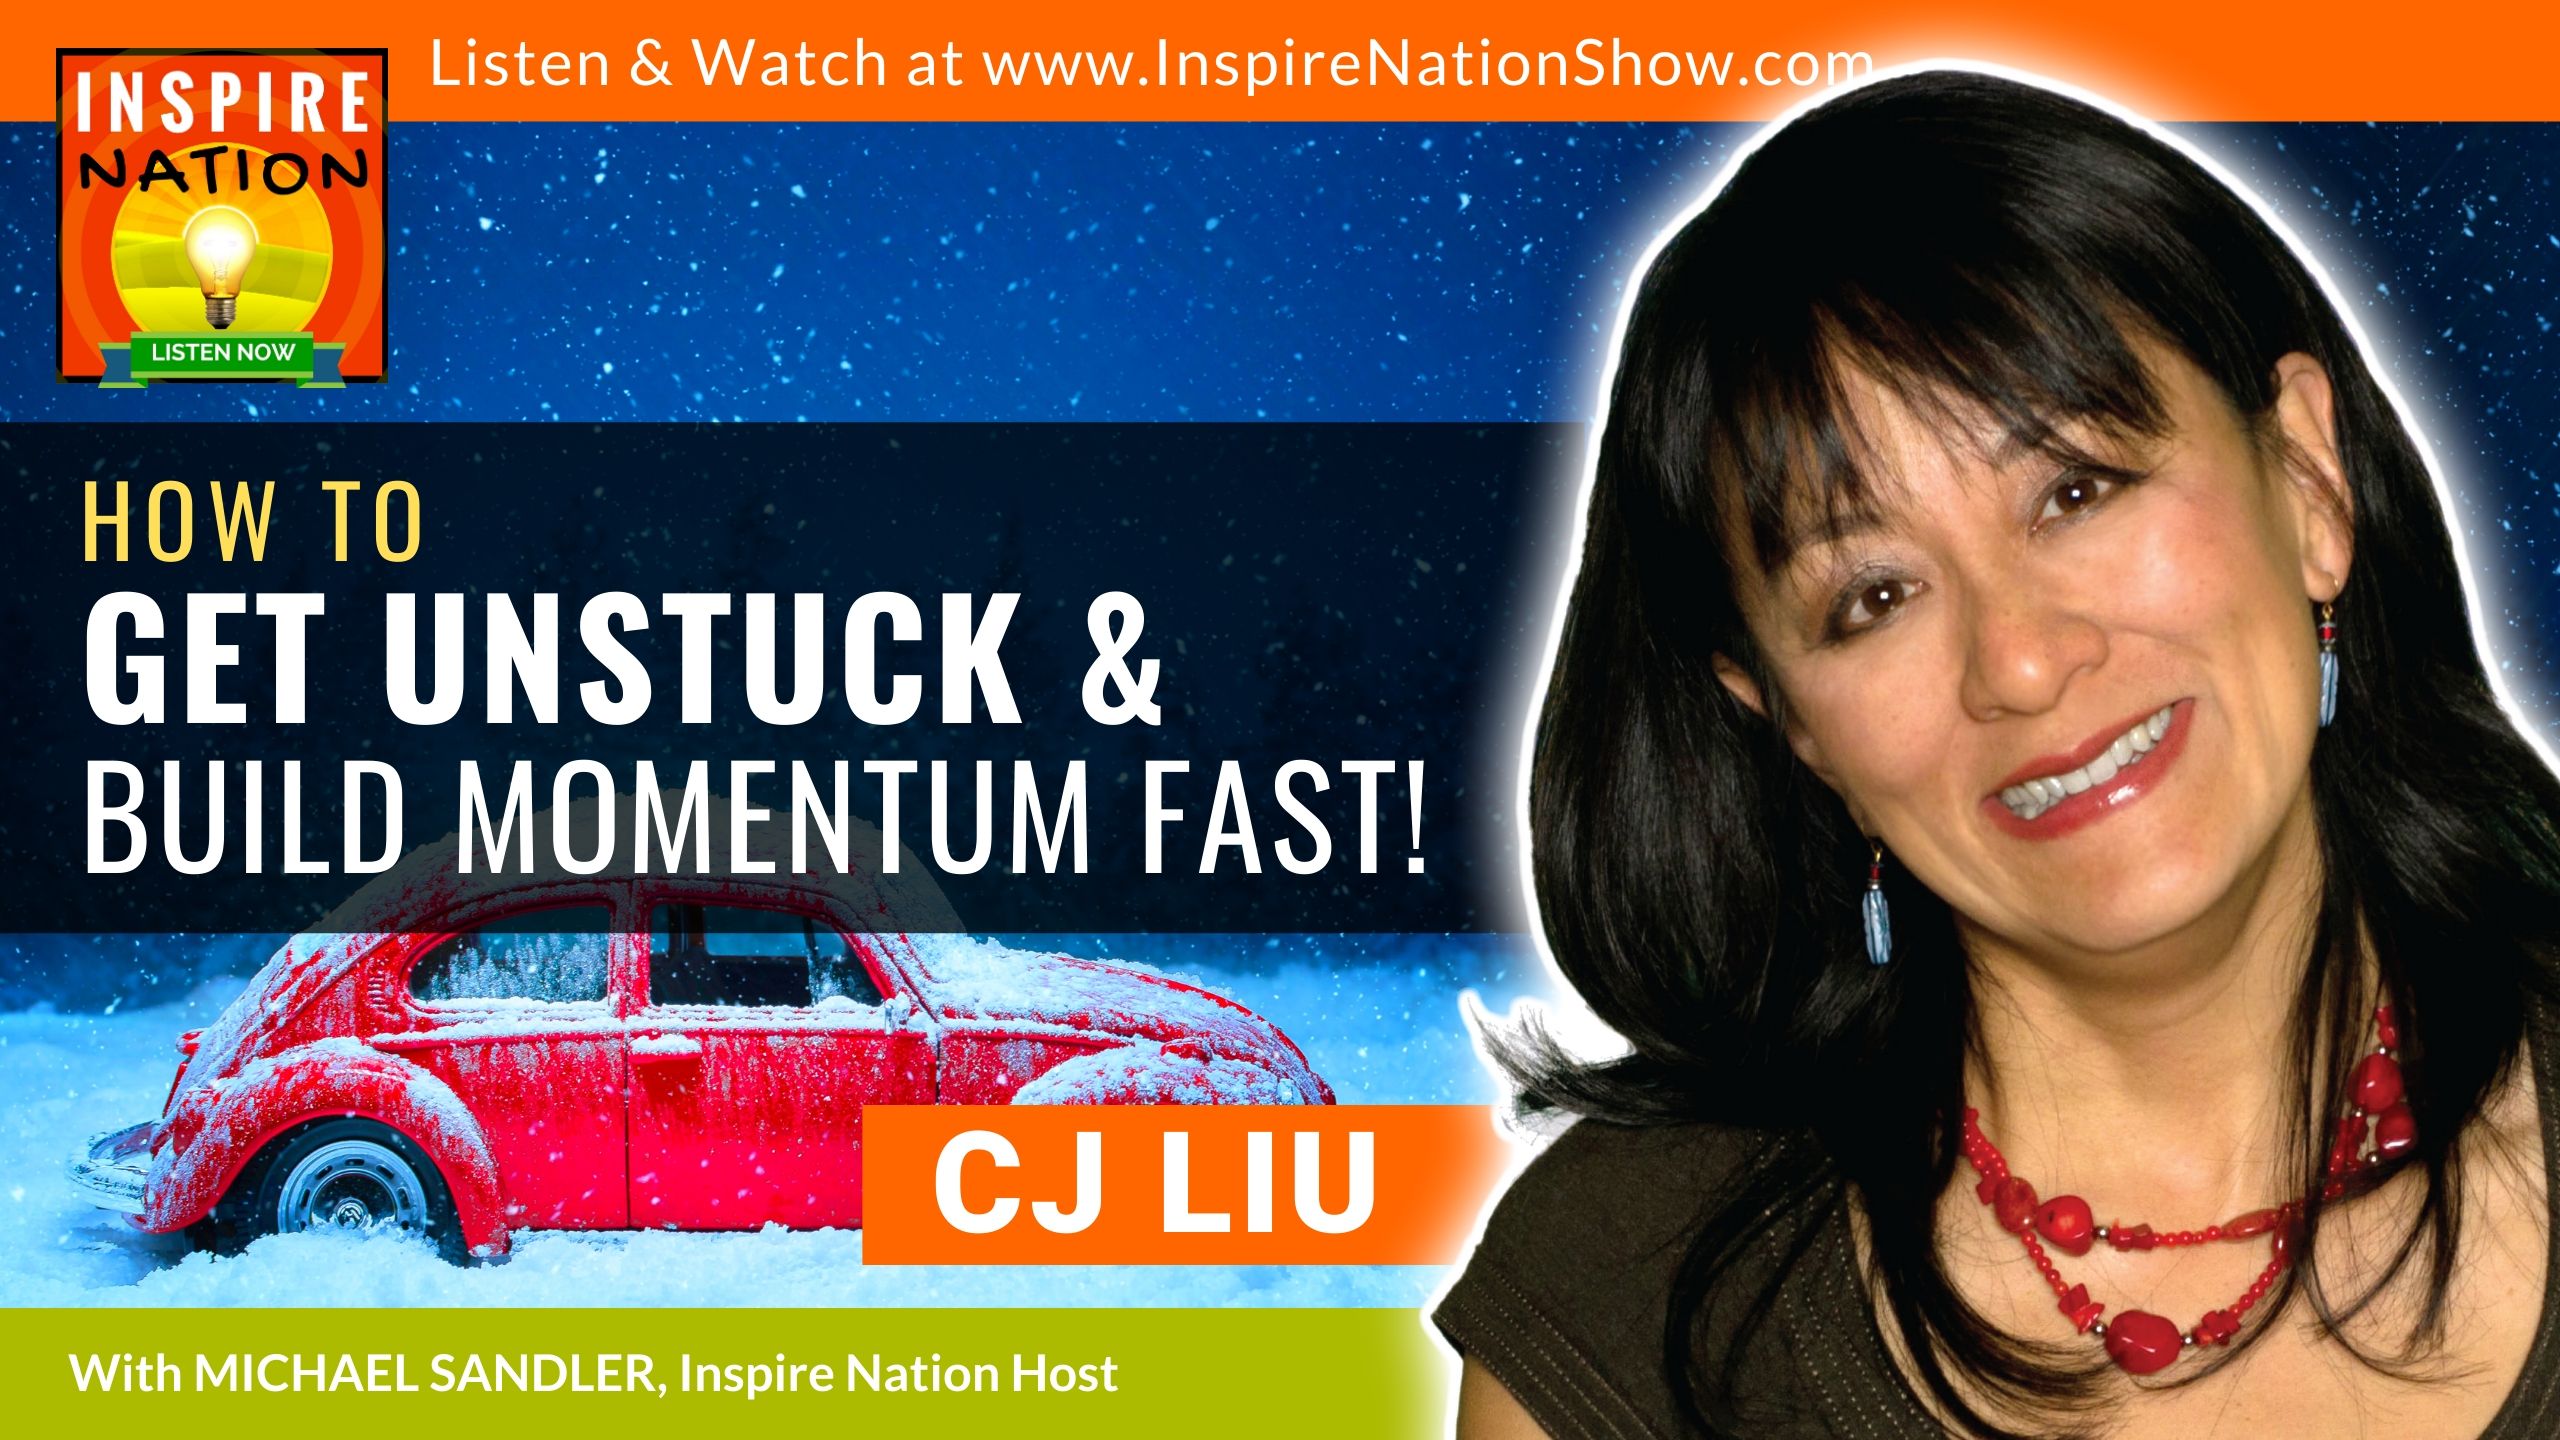 Michael Sandler & CJ Liu chat about what it takes to get unstuck and build momentum fast!